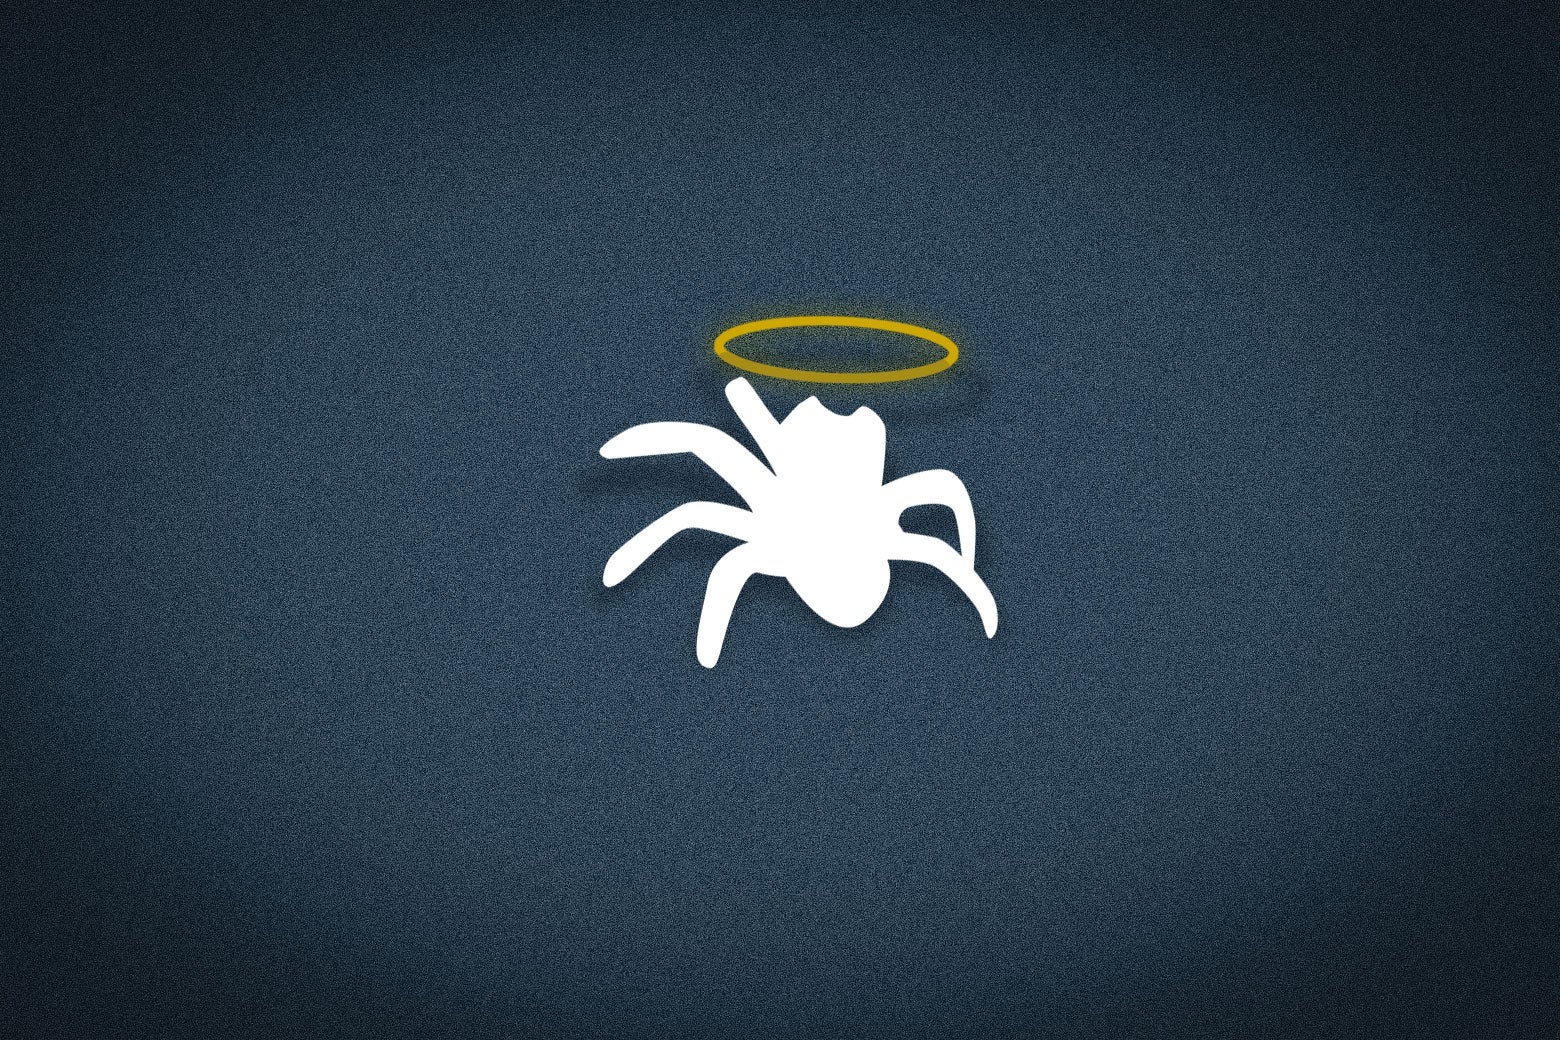 White silhouette of a crab with a halo over it